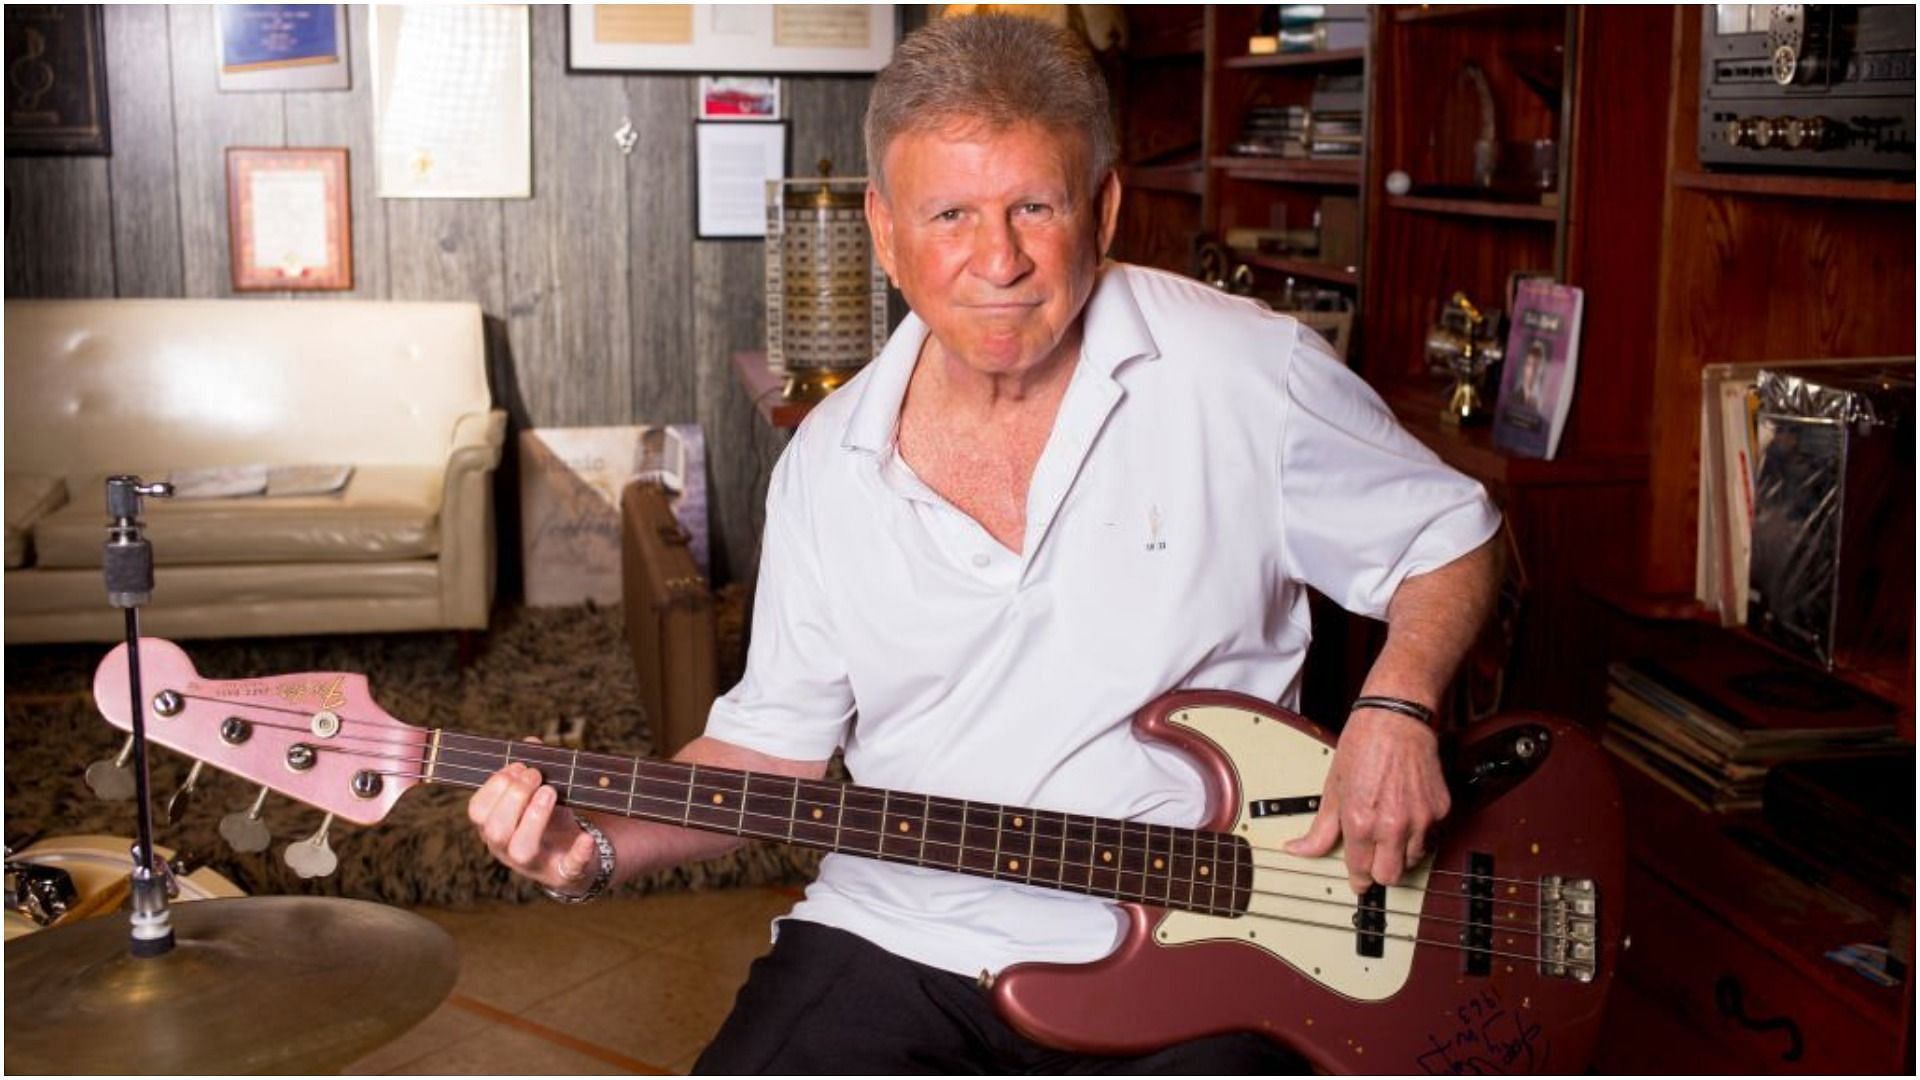 Bobby Rydell recently died at the age of 79 (Image via Phil Penman/Getty Images)